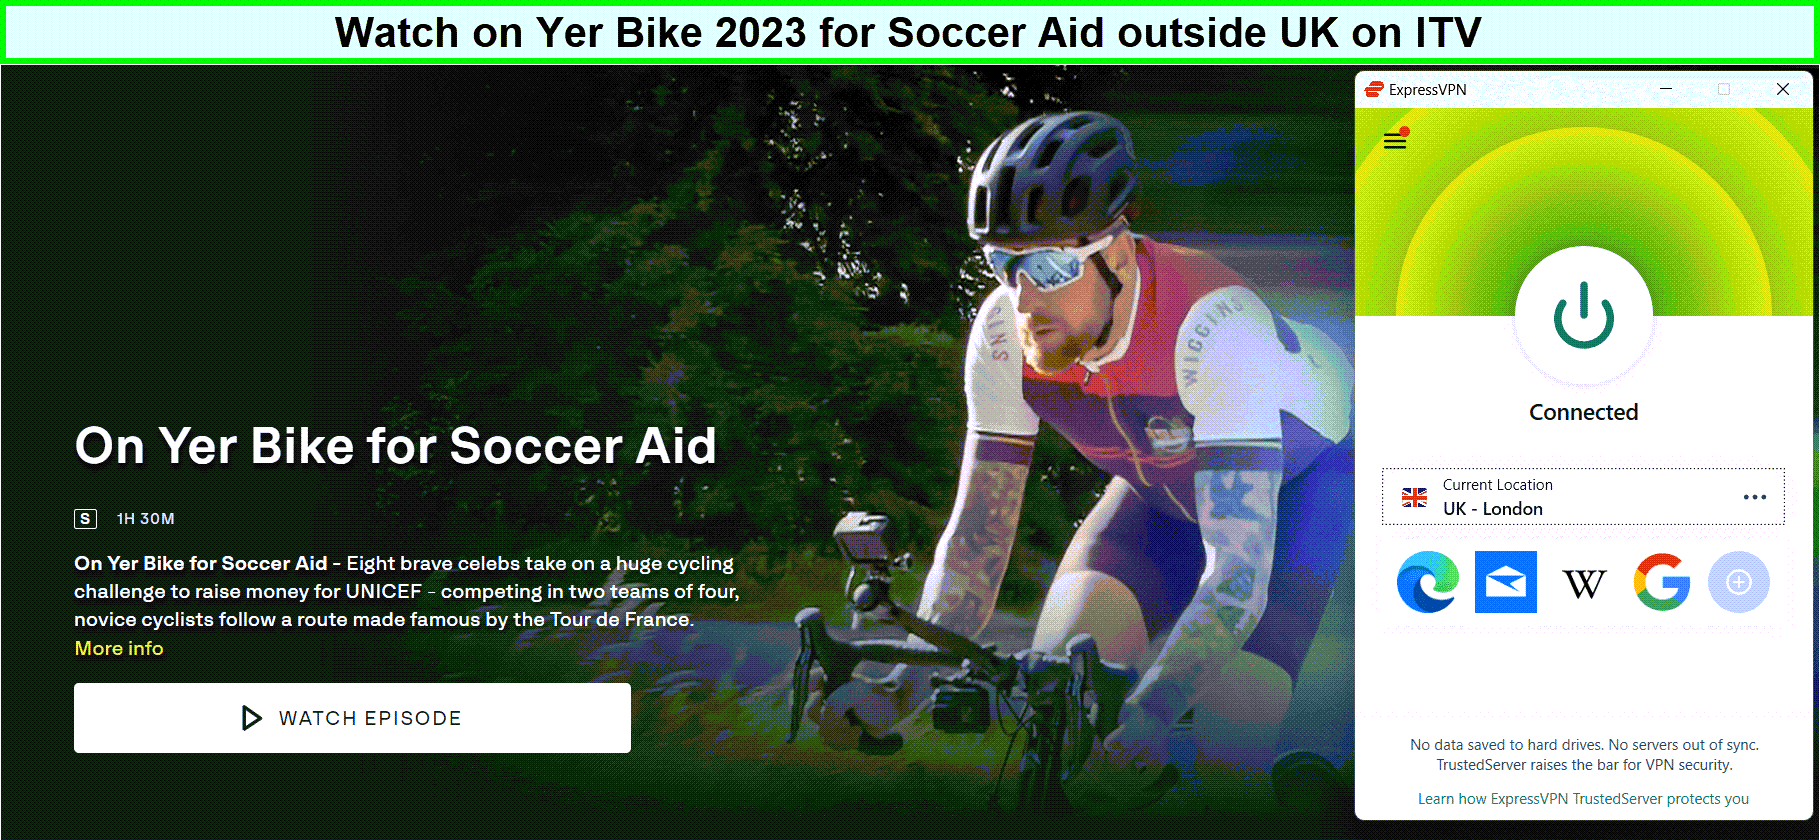 Watch-On-Yer-Bike-2023-for-Soccer-Aid-in-Spain-on-ITV-with-ExpressVPN